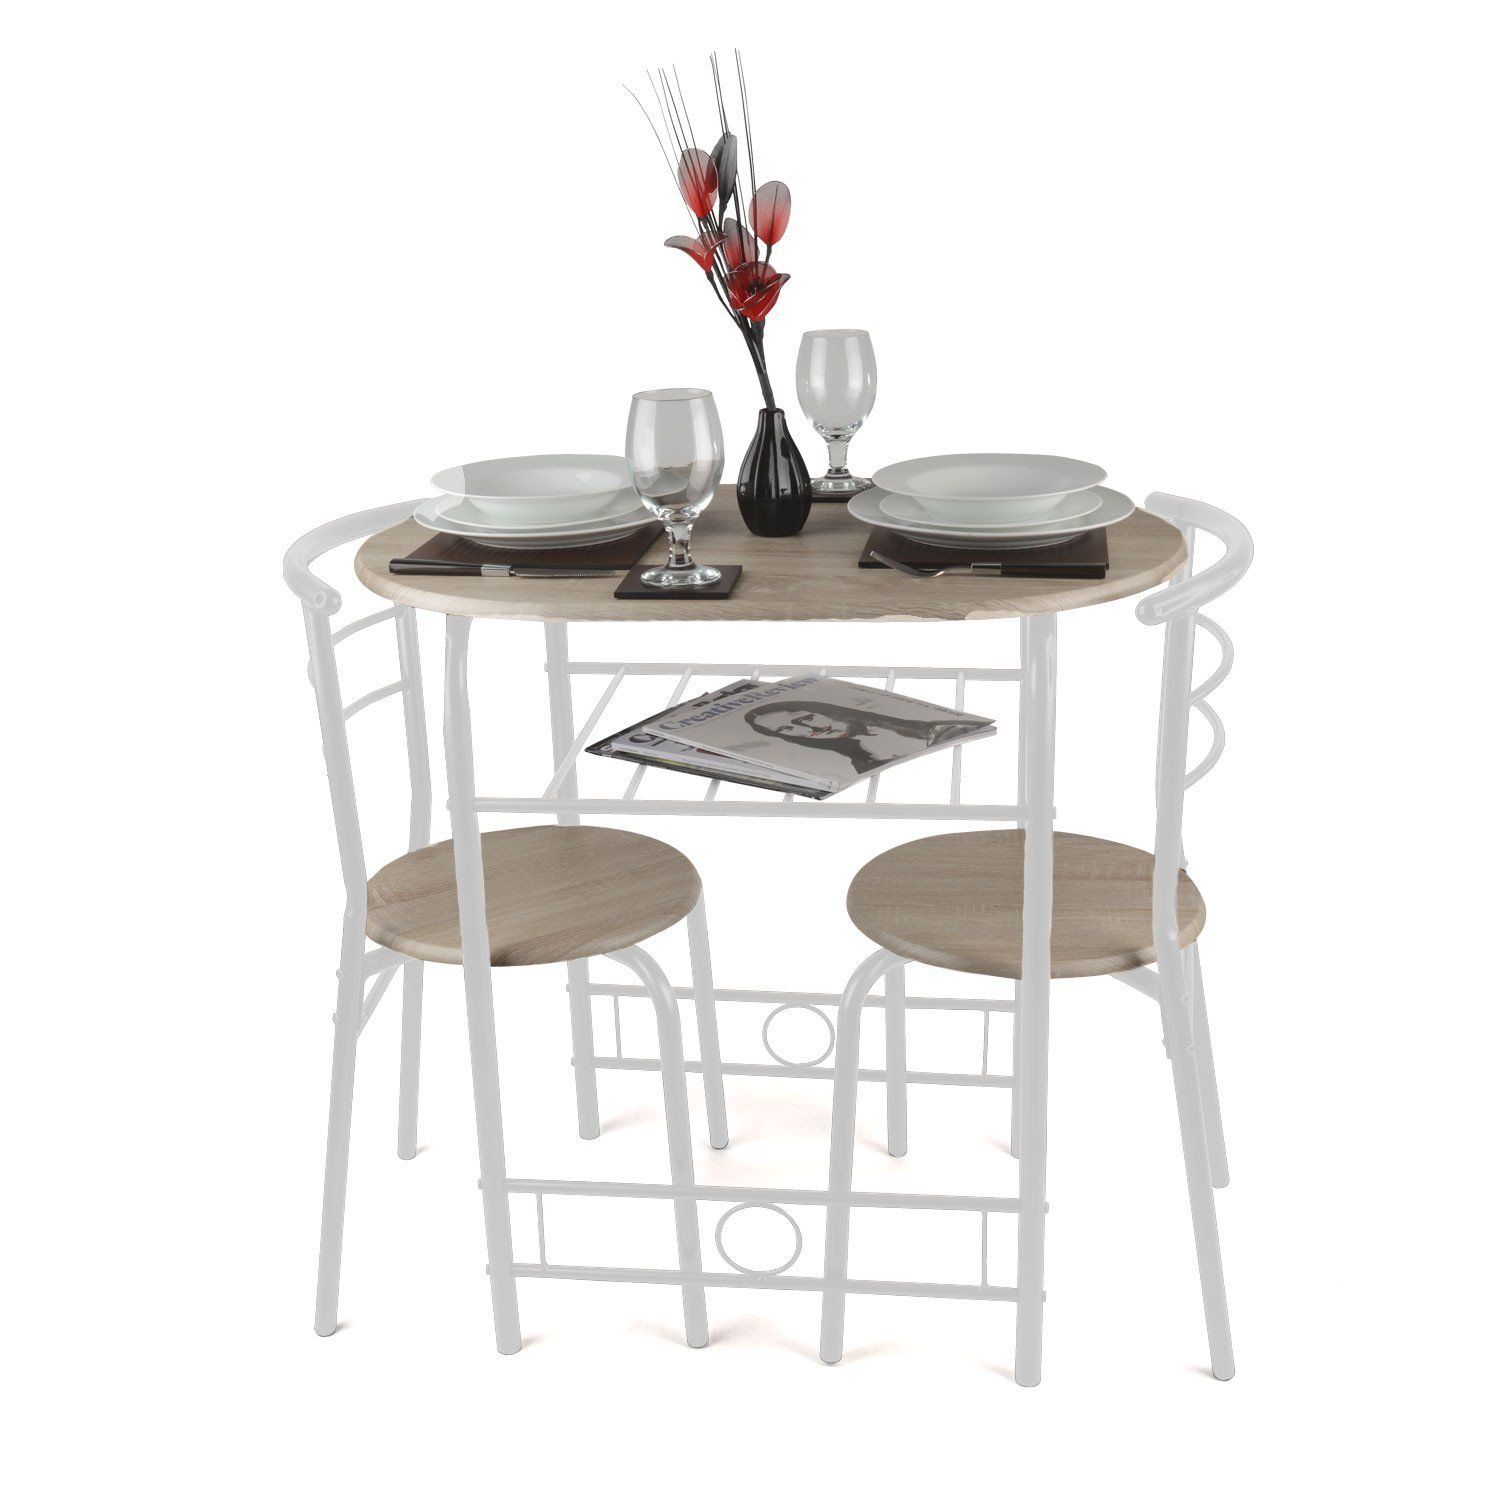 Christow 3 Piece Breakfast Dining Set White: Amazon.co.uk: Kitchen Within 2017 3 Piece Breakfast Dining Sets (Photo 35430 of 35622)